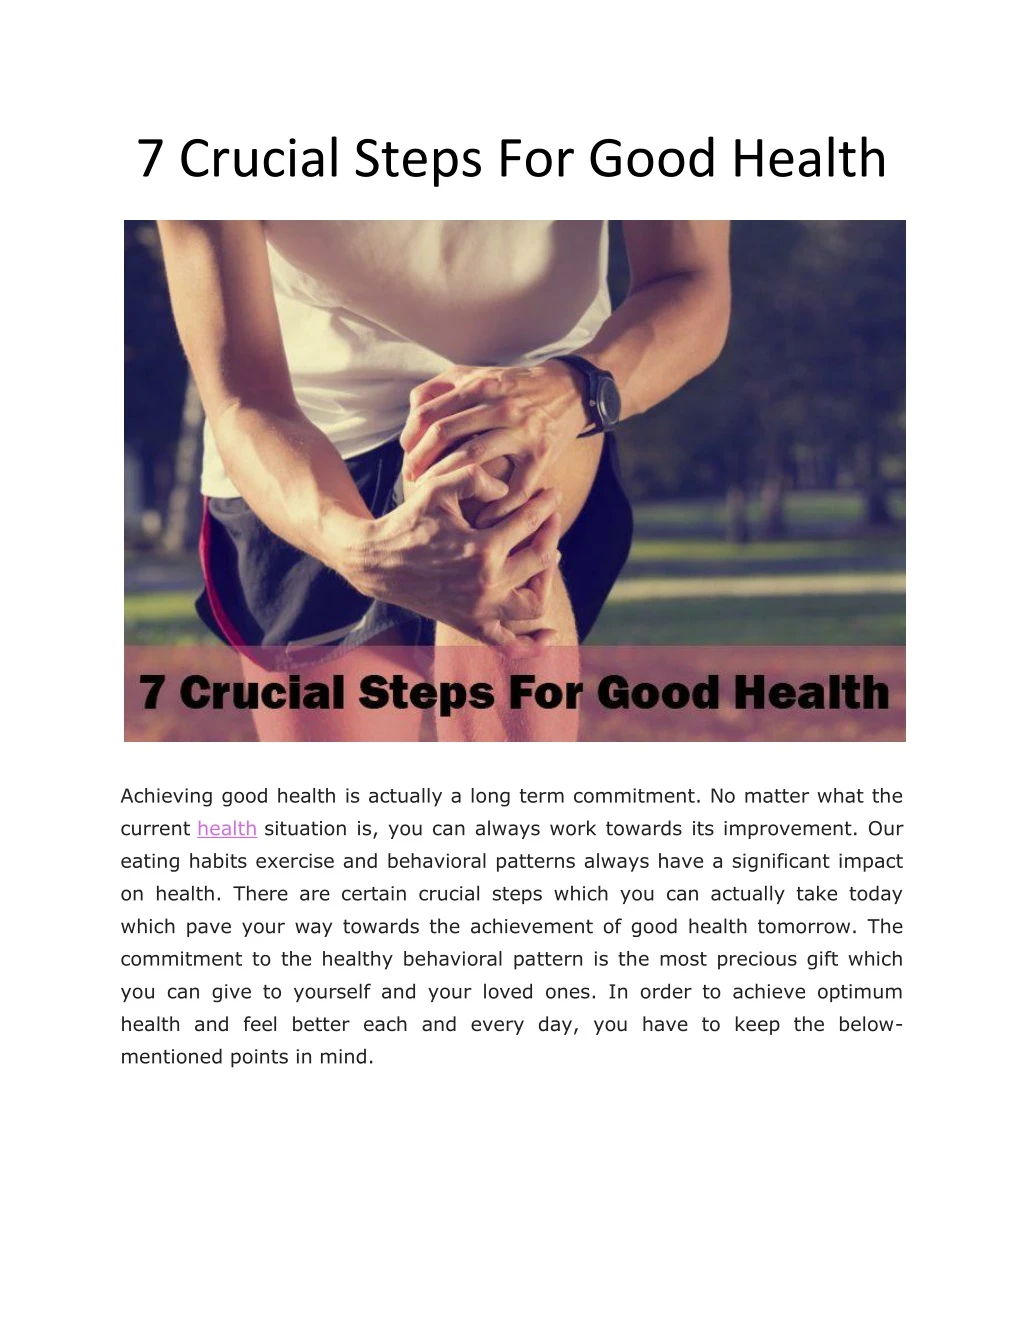 7 crucial steps for good health